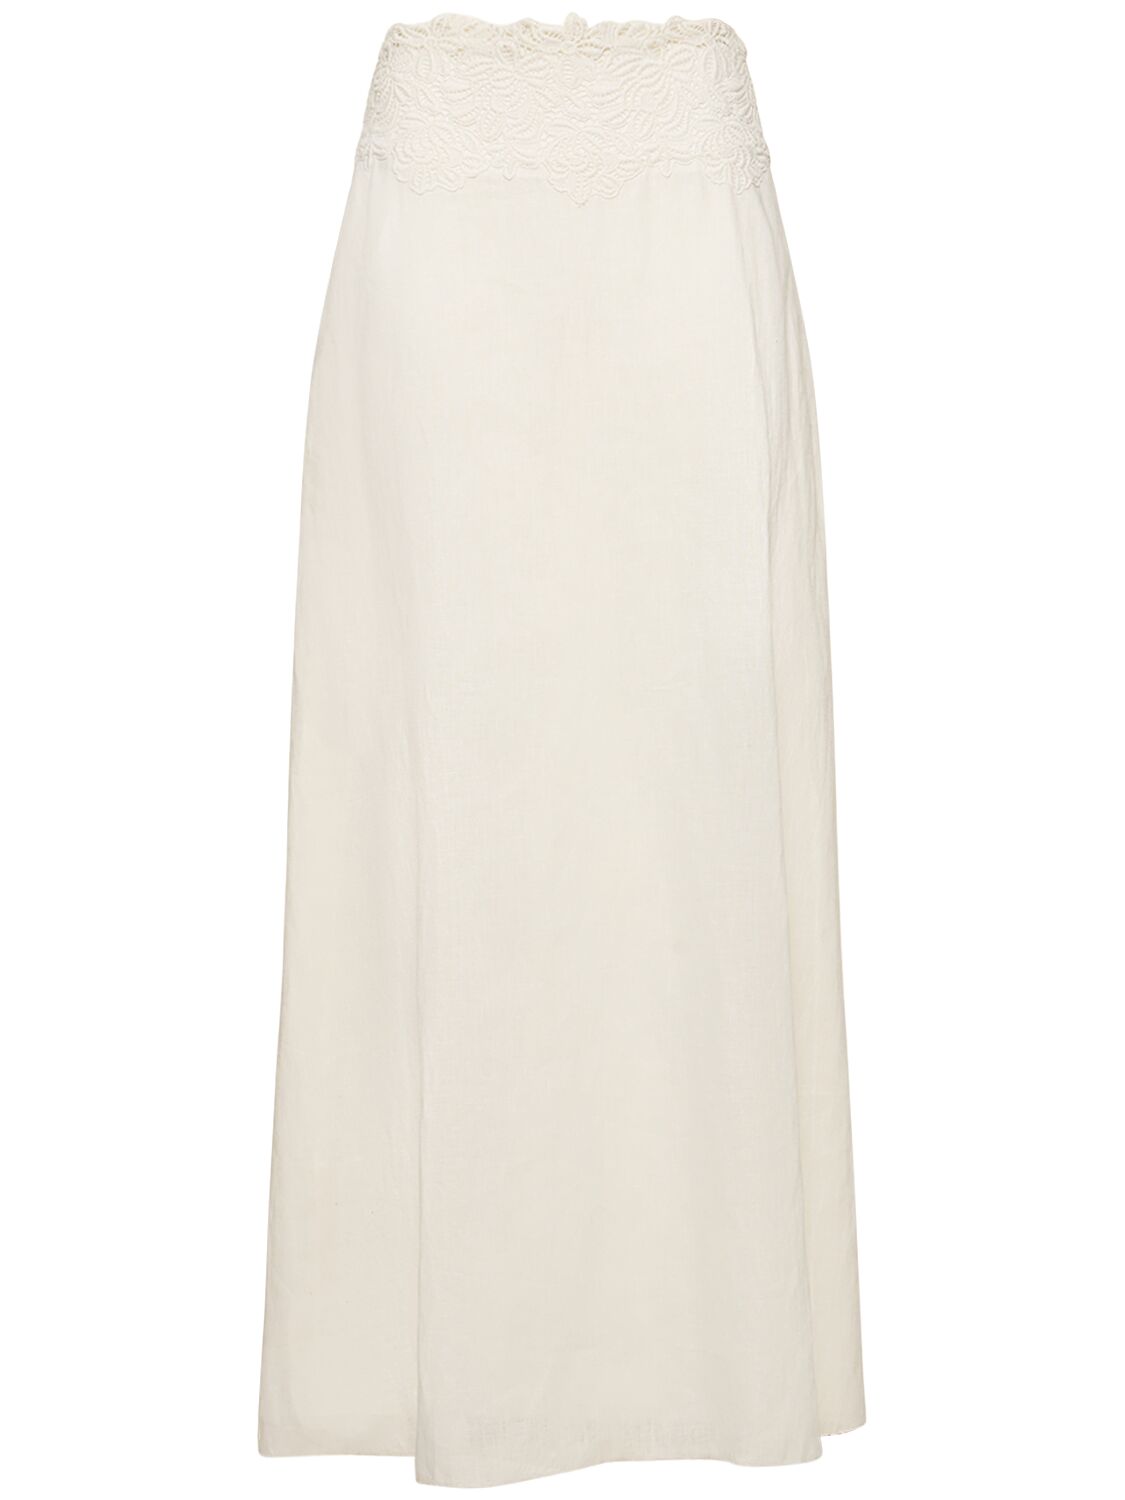 Ermanno Scervino Linen Long Skirt W/ Lace Inserts In White